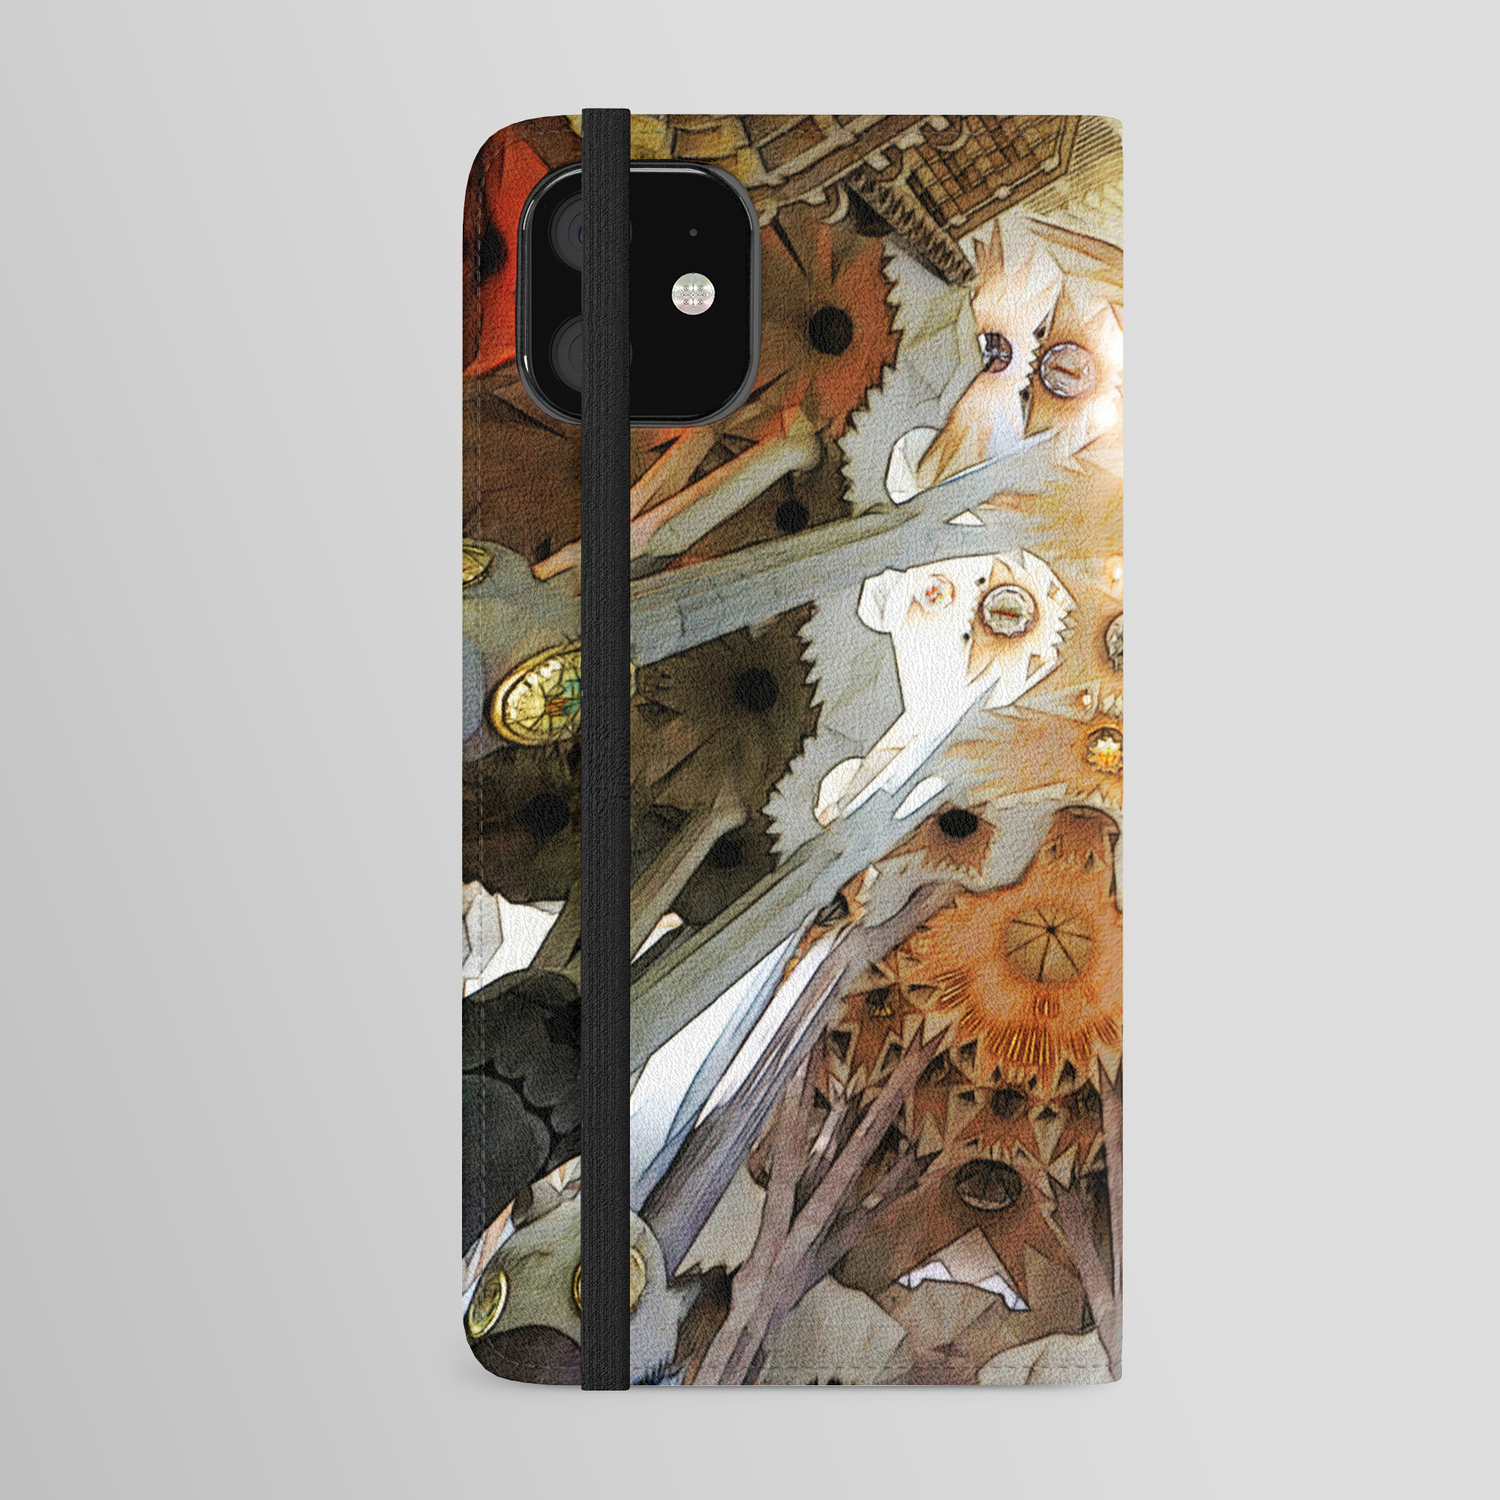 Sagrada Familia By Gaudi Barcelona Cathedral Iphone Wallet Case By Autumncello Society6